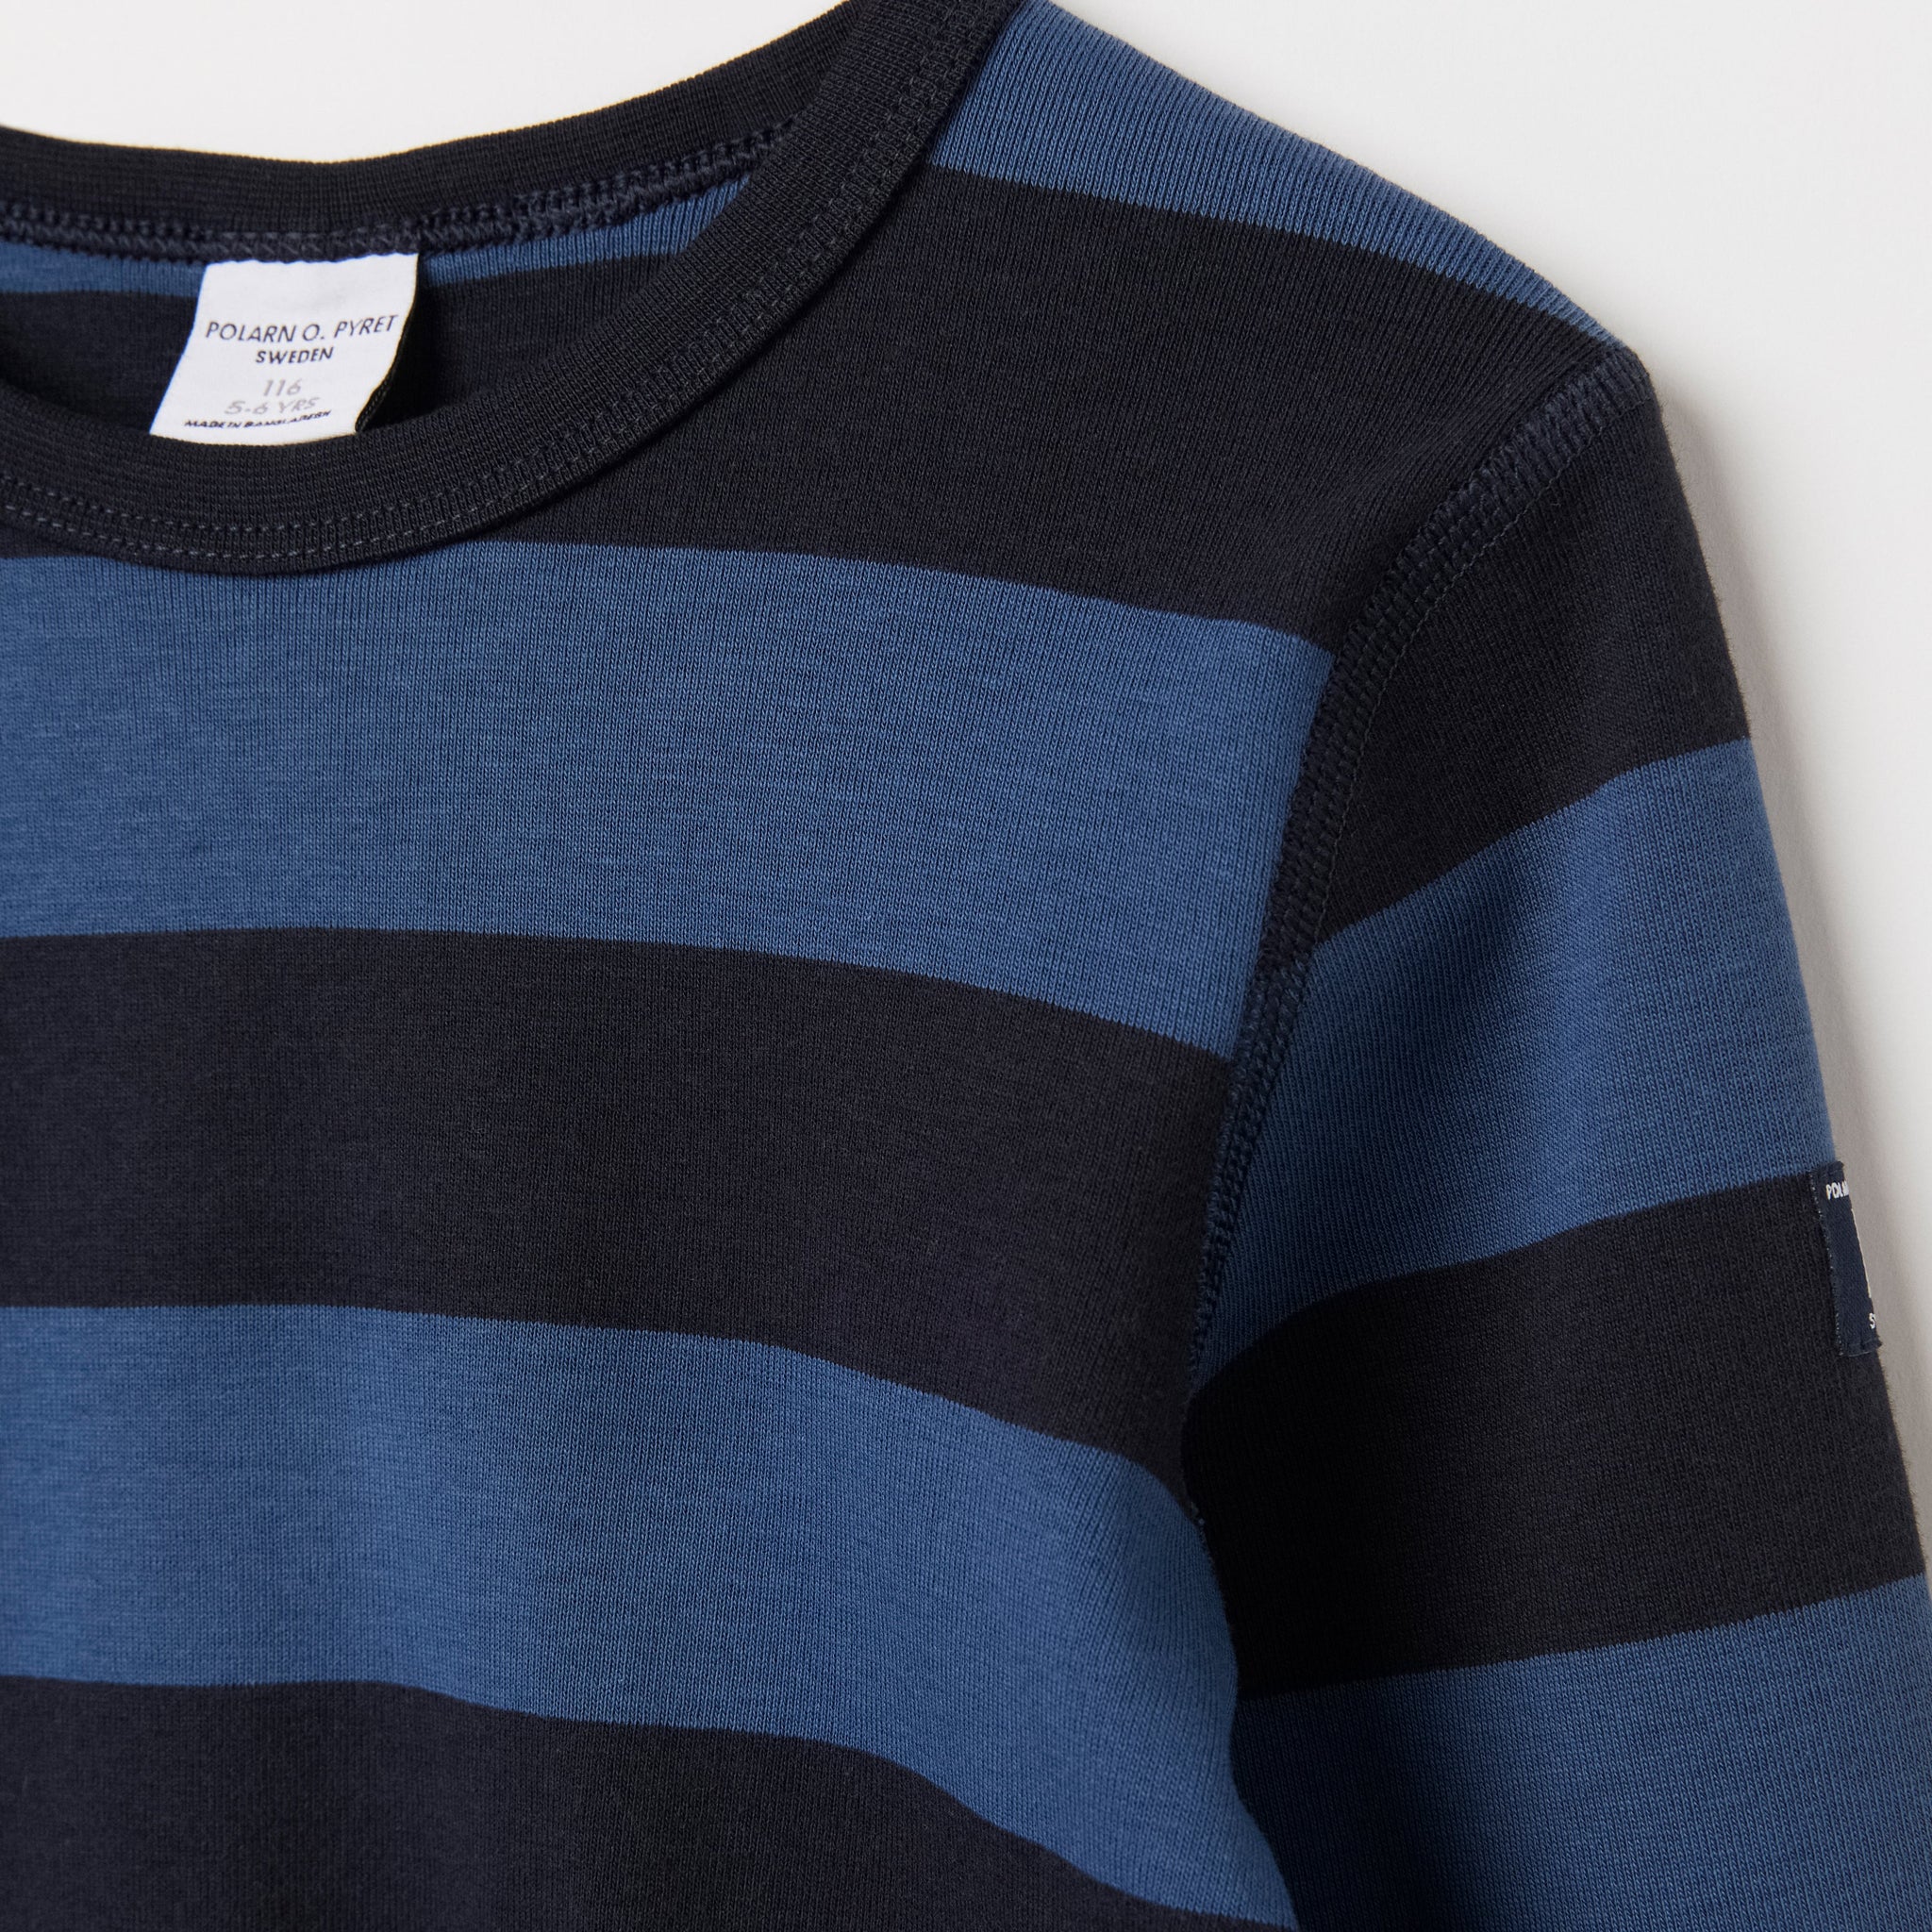 Organic Cotton Striped Blue Kids Top from the Polarn O. Pyret Kidswear collection. The best ethical kids clothes